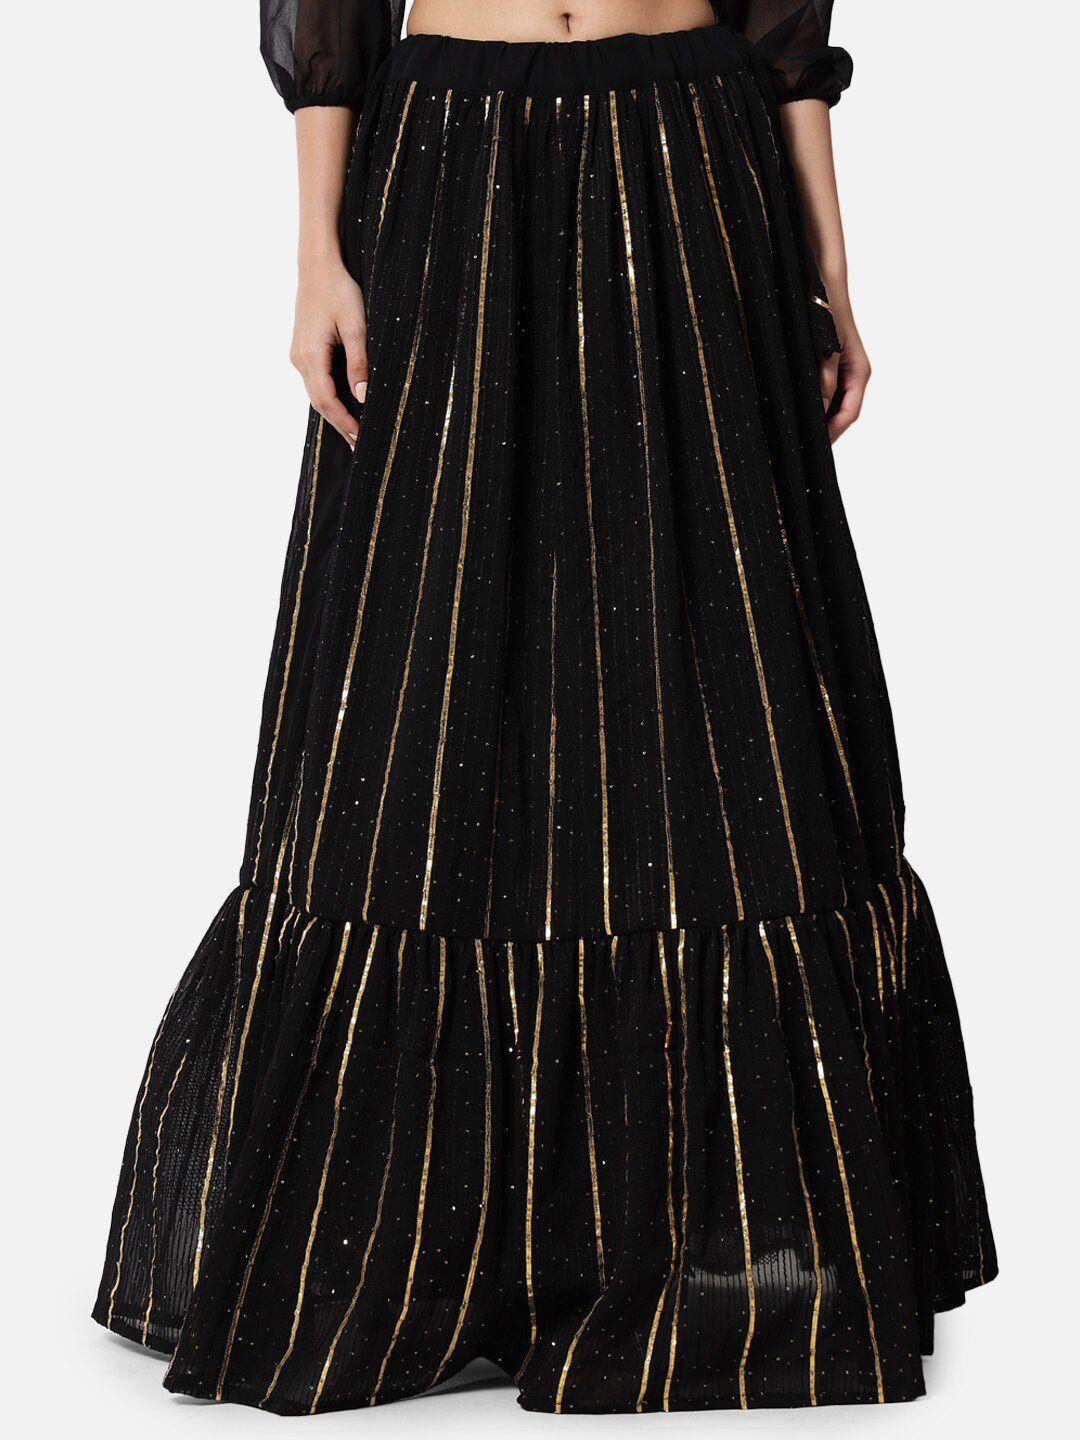 studio rasa striped embellished detailed flared maxi ethnic skirt with can-can